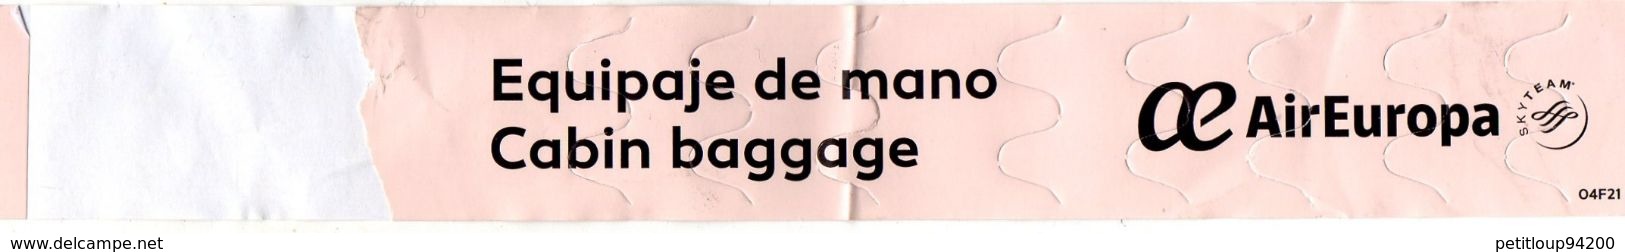 10 ETIQUETTES A BAGAGES *Nouvelles Frontieres*Corsair*Air Austral*Bangkok Airways *KLM *Star Alliance *Air Europa*United - Baggage Labels & Tags